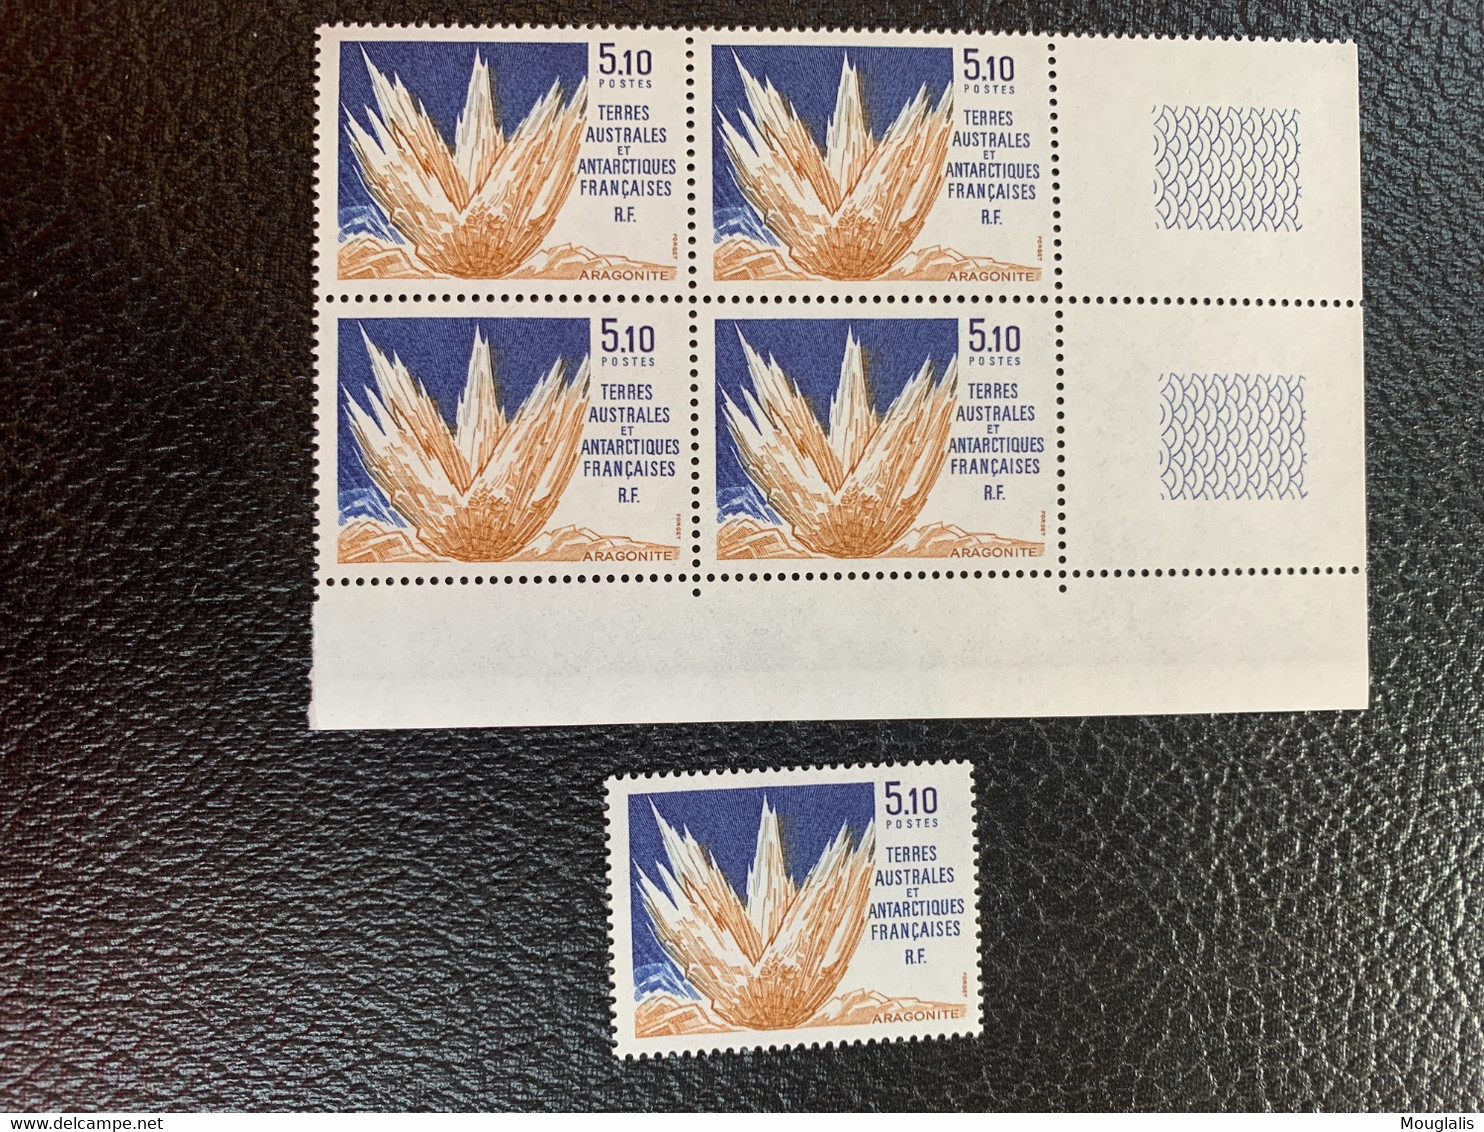 Taaf Timbres / Stamp - Yvert And Tellier N° 153 En Bloc De 4 + 1 - Neufs